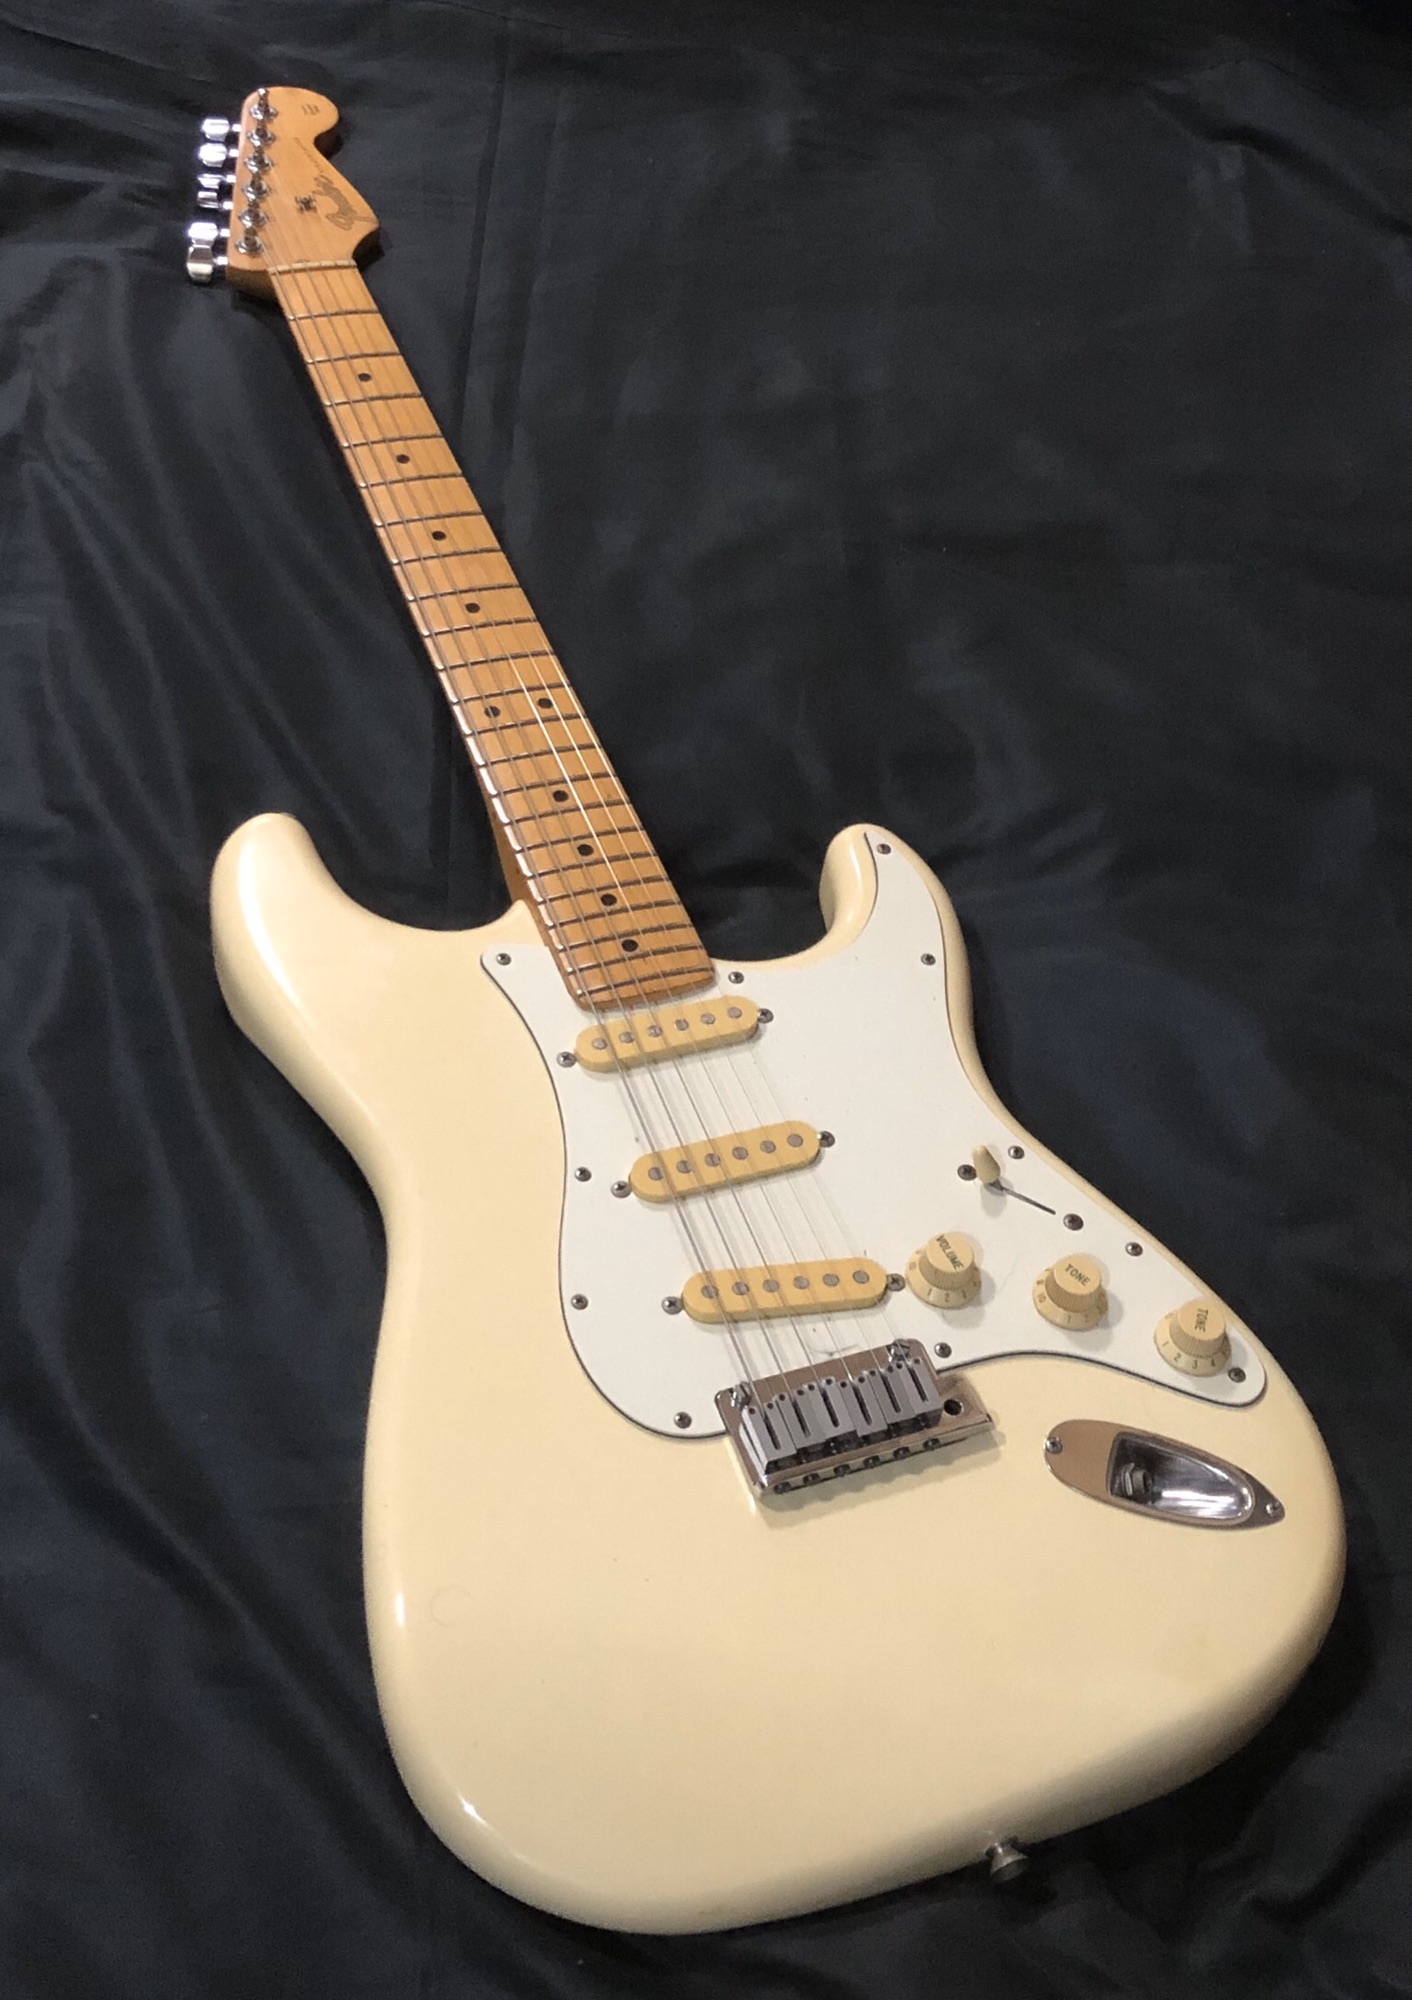 1989 Fender Stratocaster Limiited Edition 〜 Very Rare Guitar ...